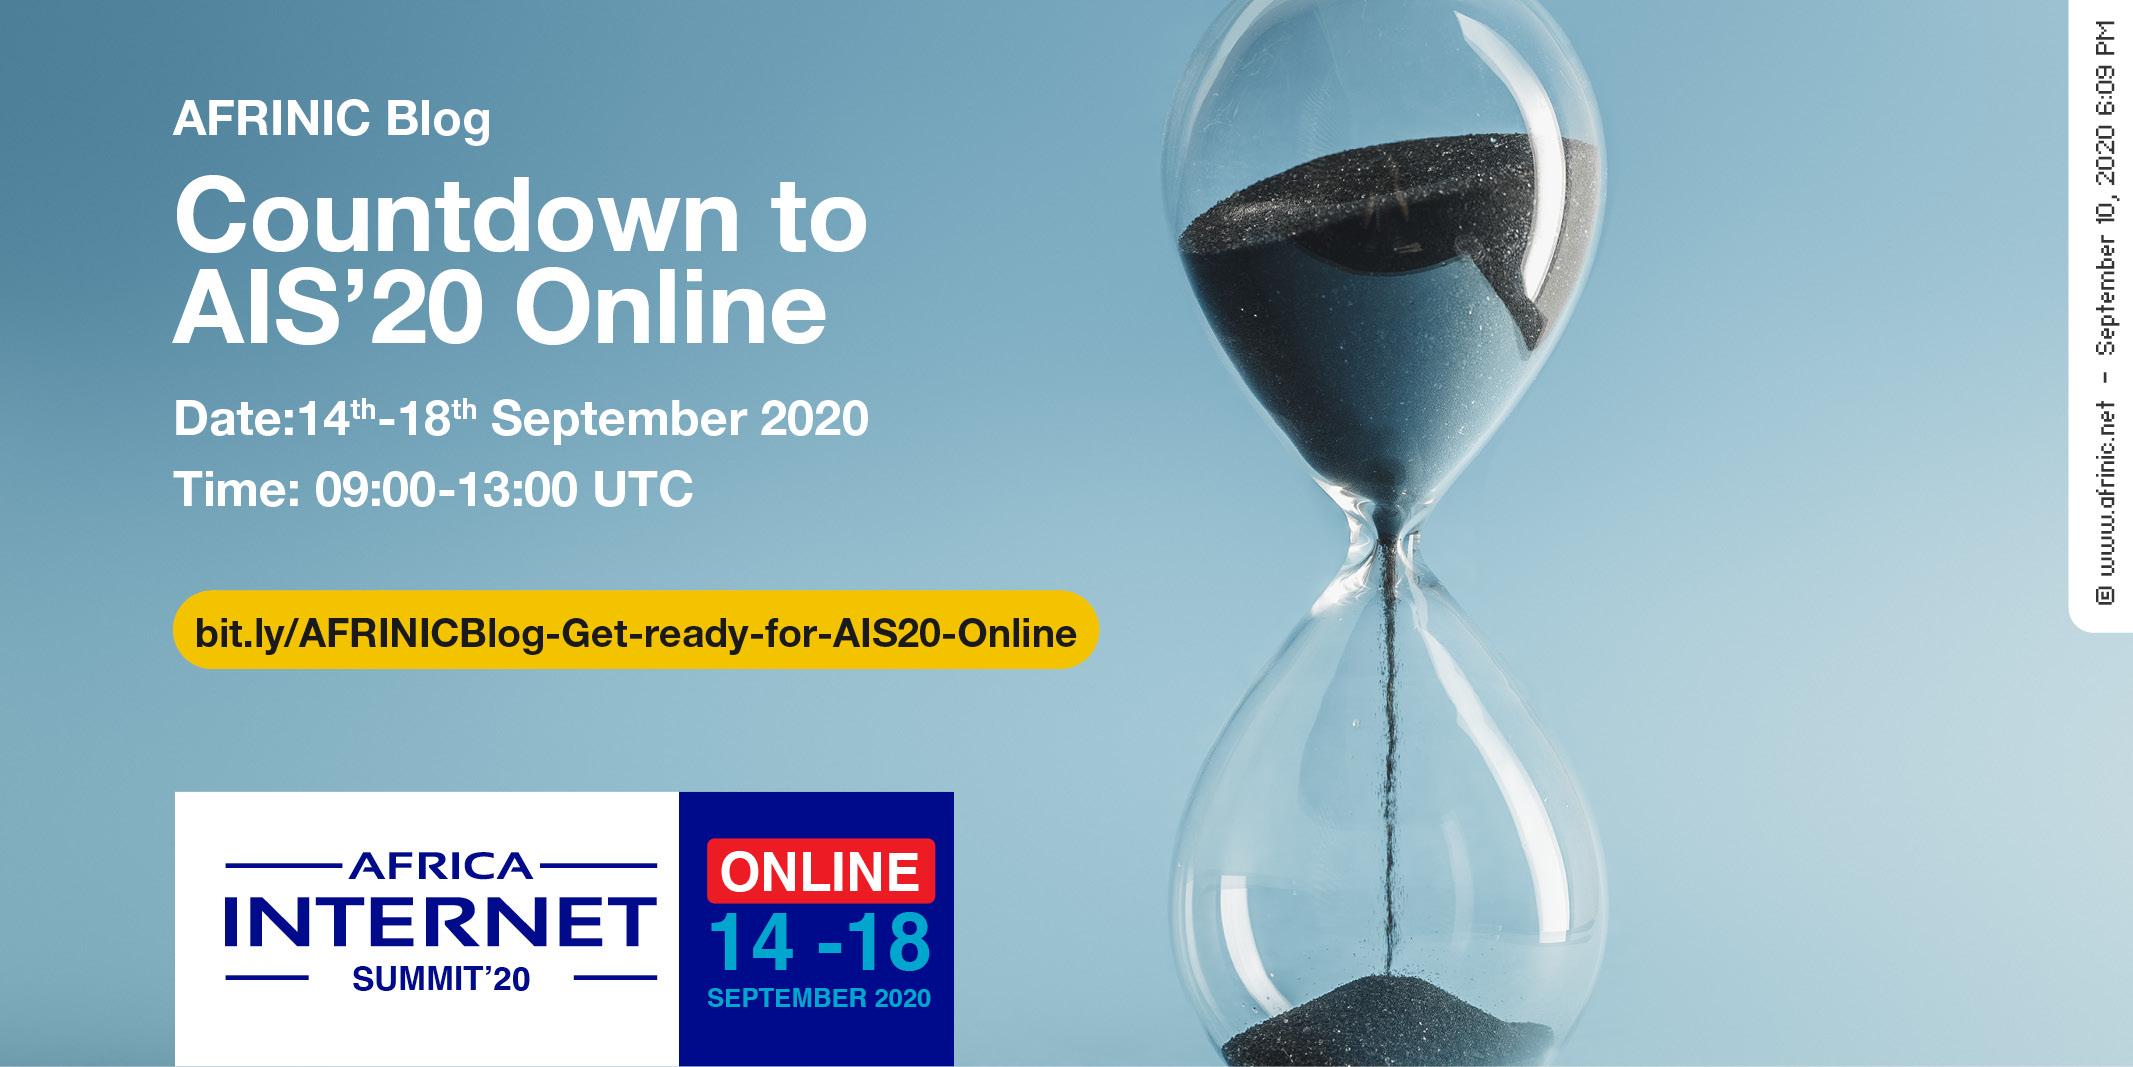 Are you looking forward to AIS’20 Online as we are?